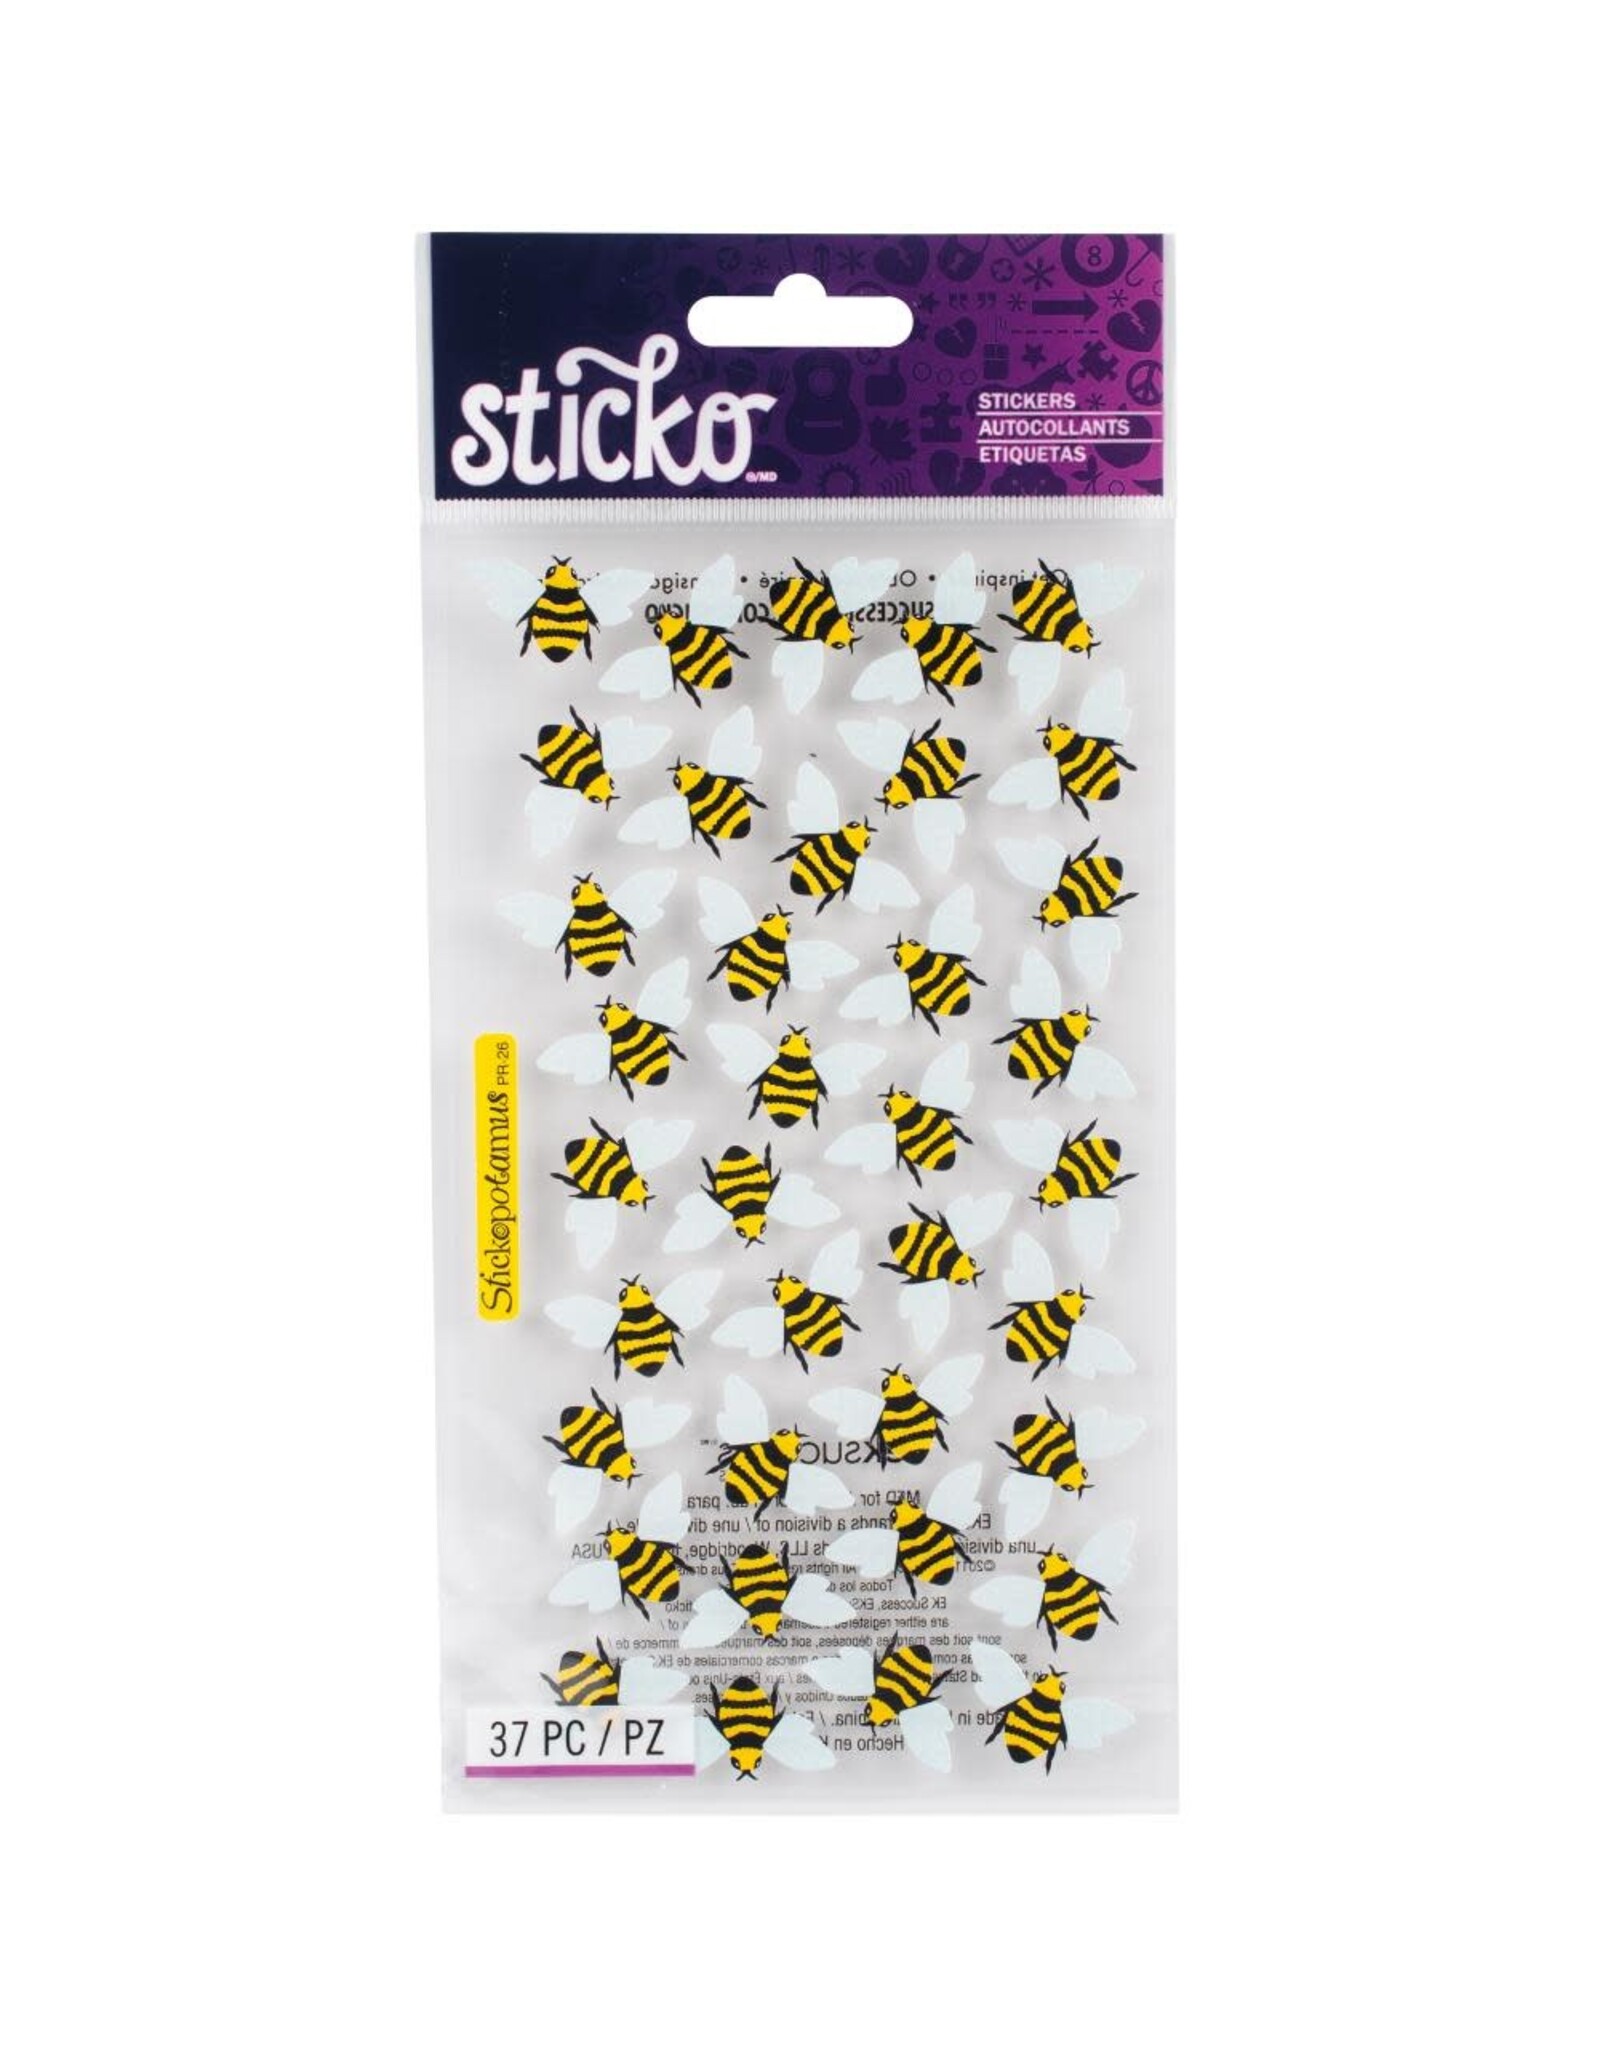 AMERICAN CRAFTS AMERICAN CRAFTS STICKO BEES STICKERS